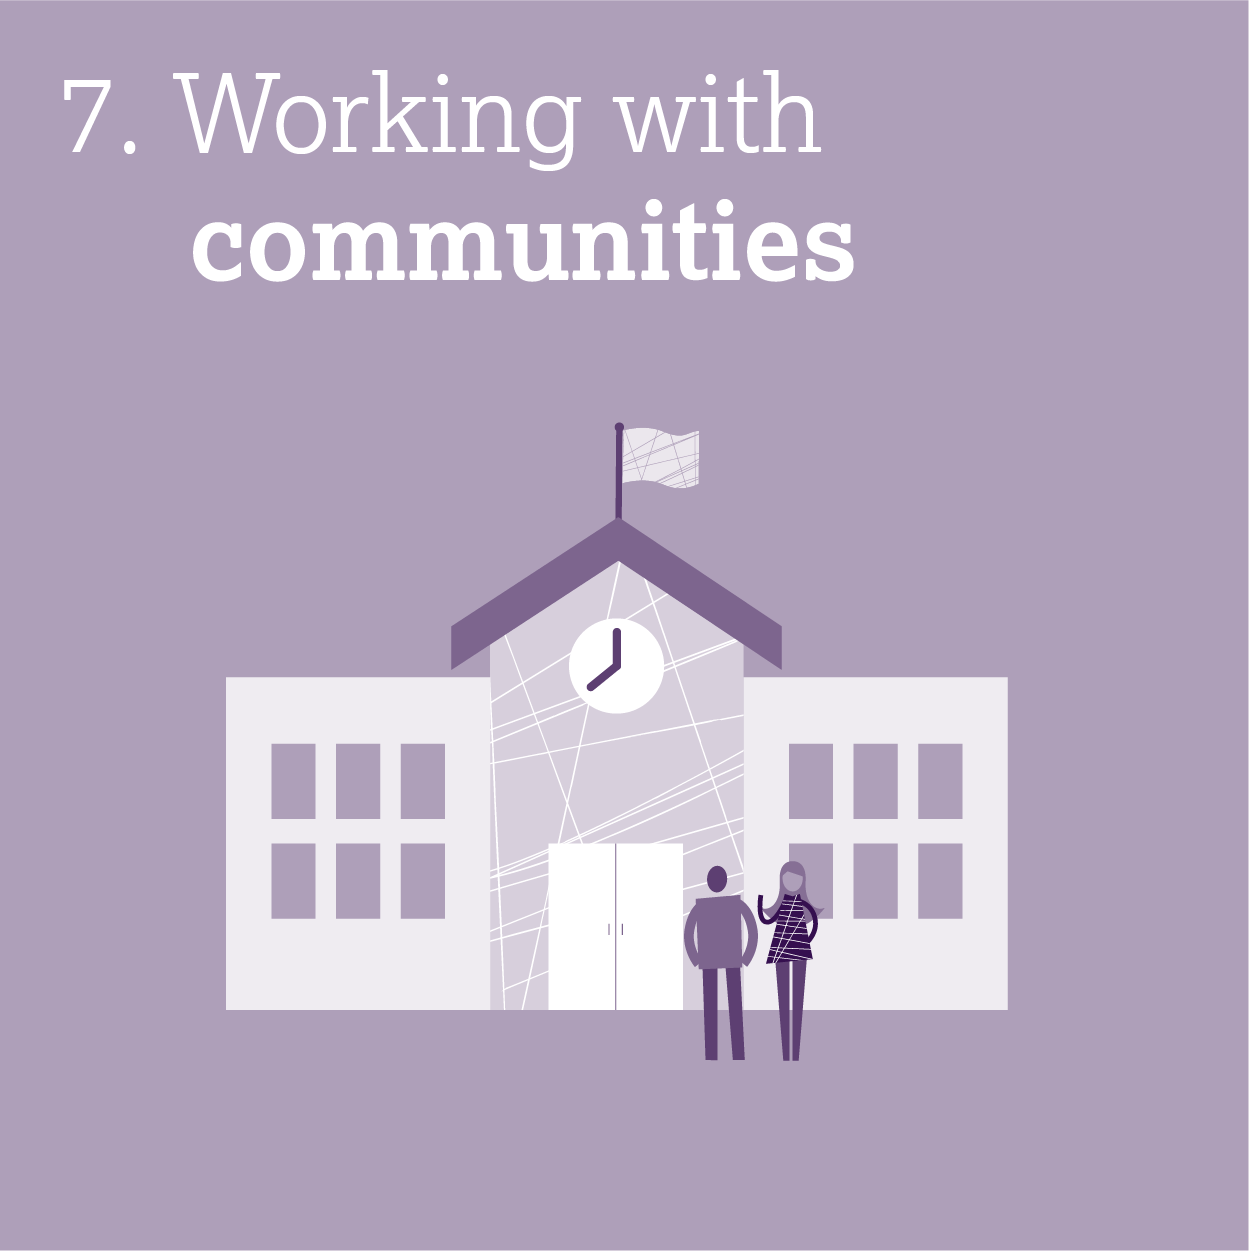 7. Working with communities